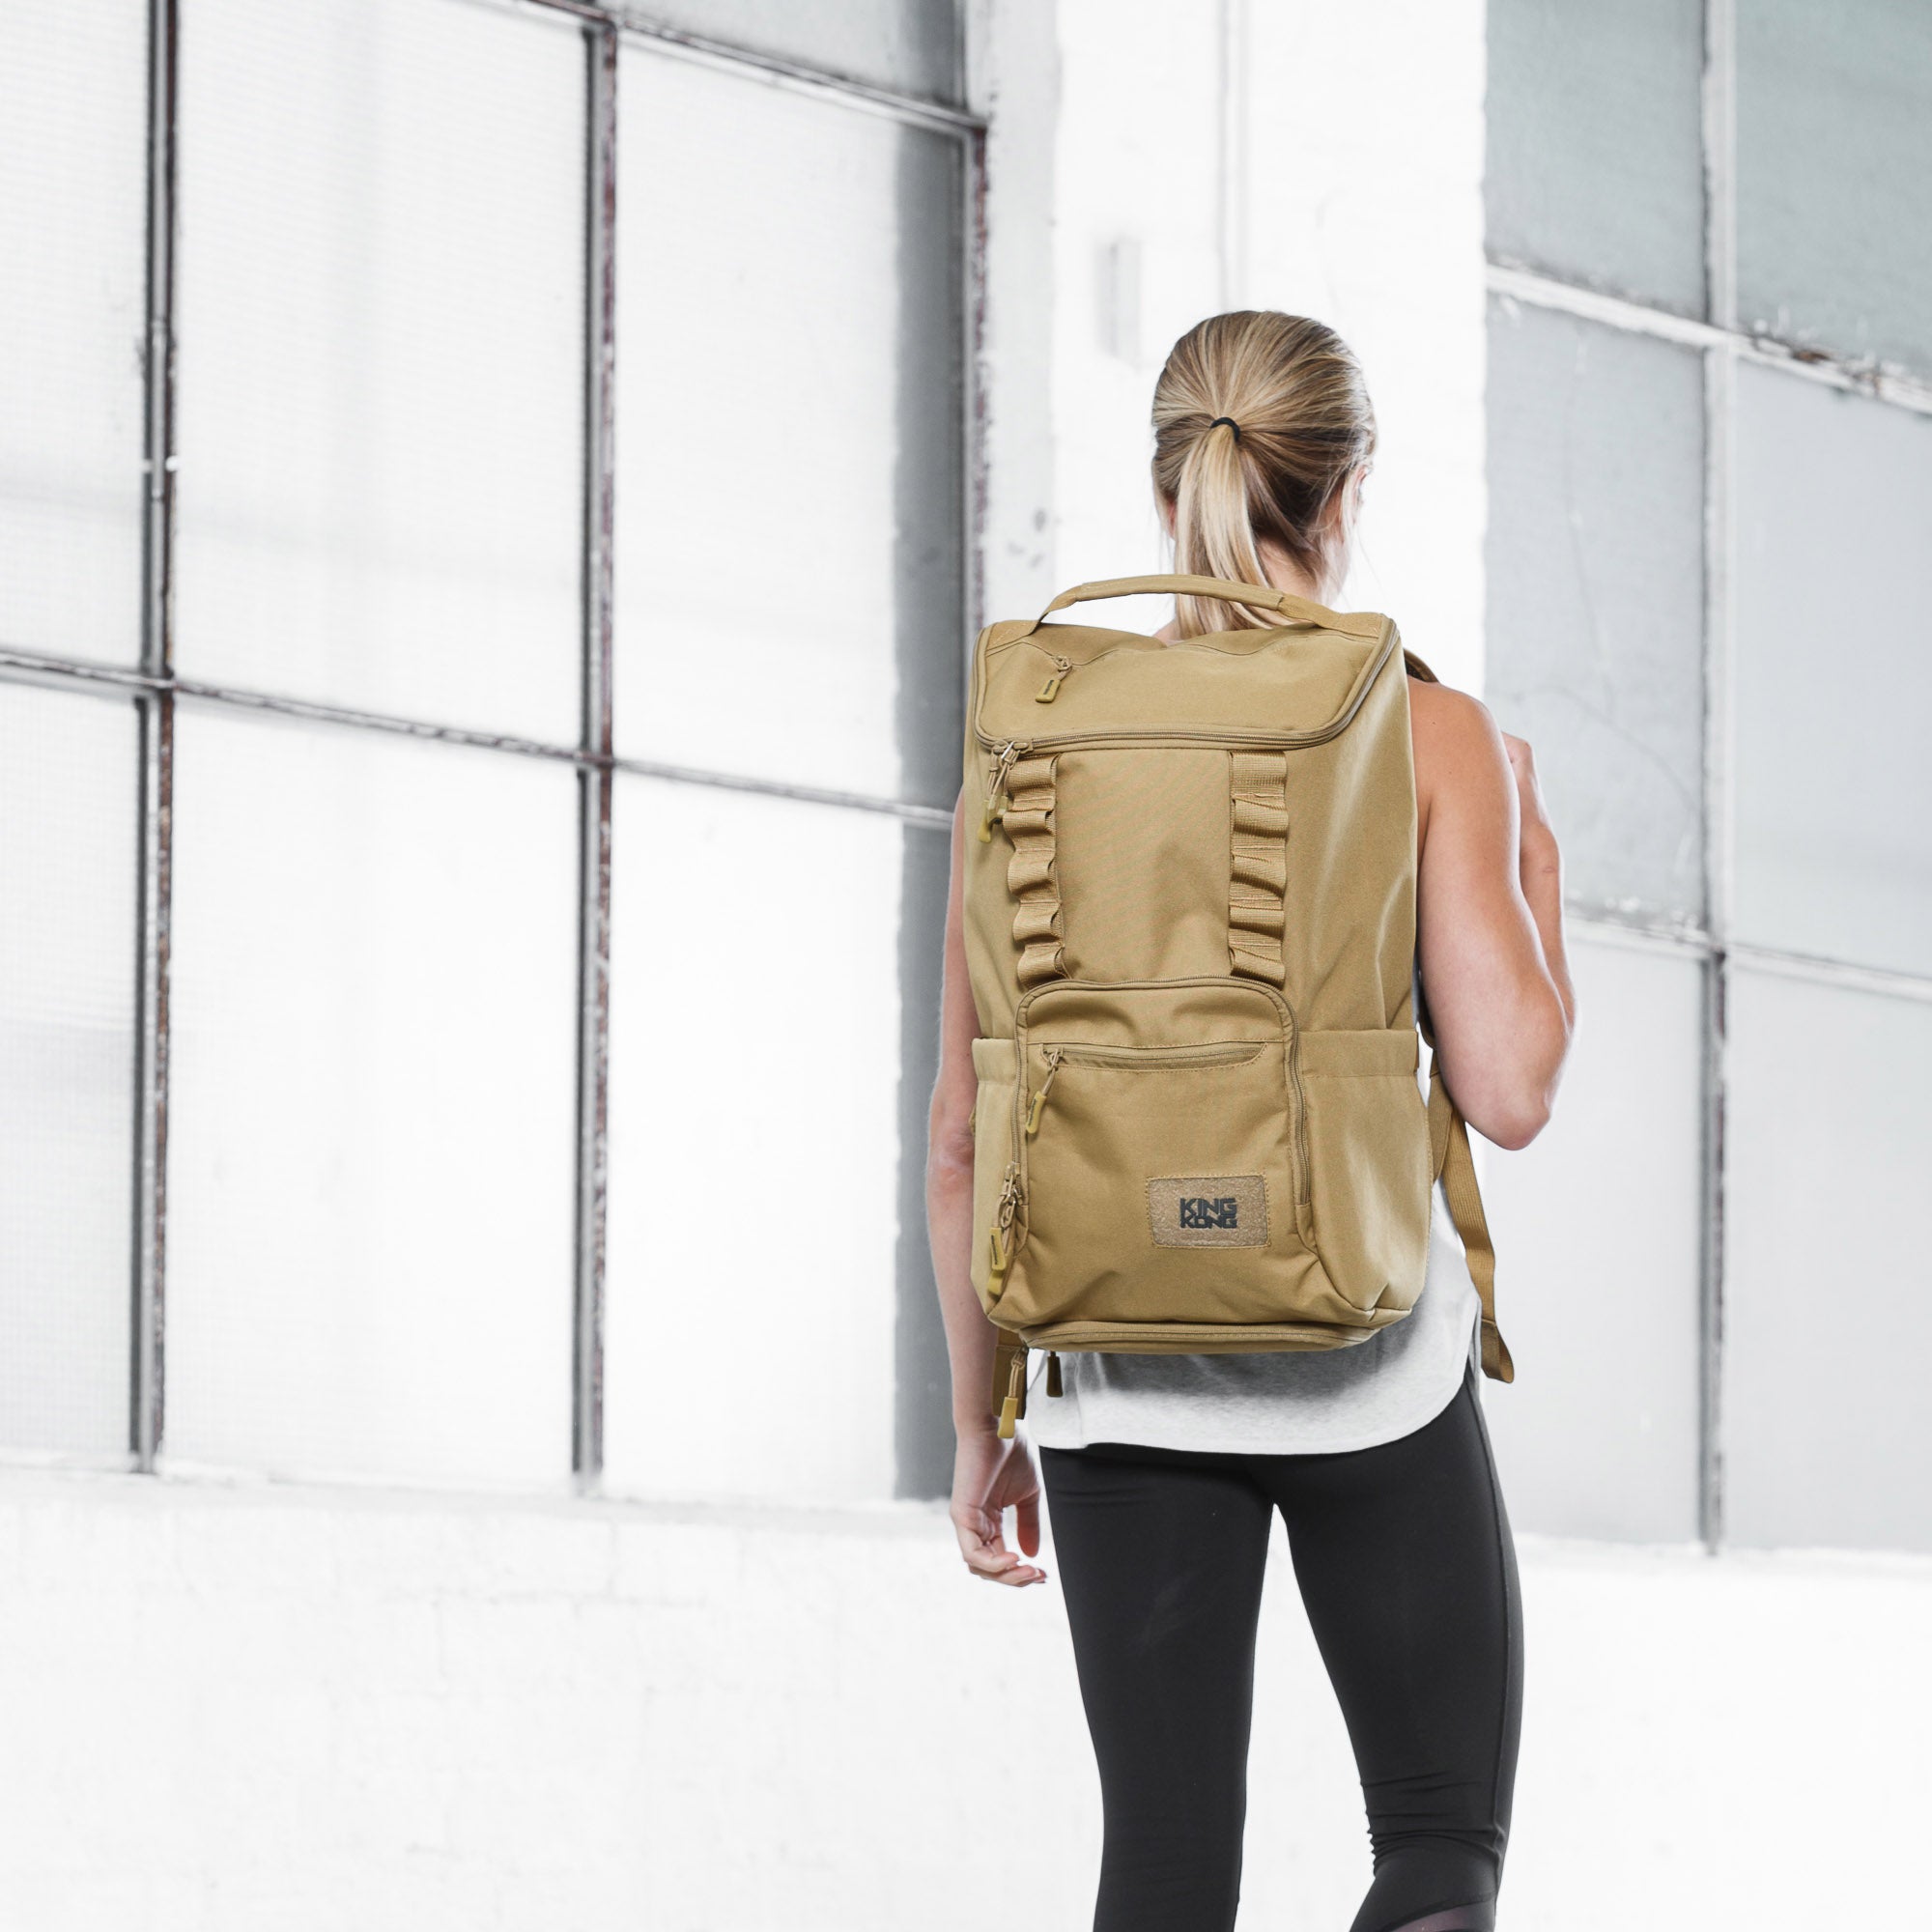 Are Backpacks Bad For Your Back?